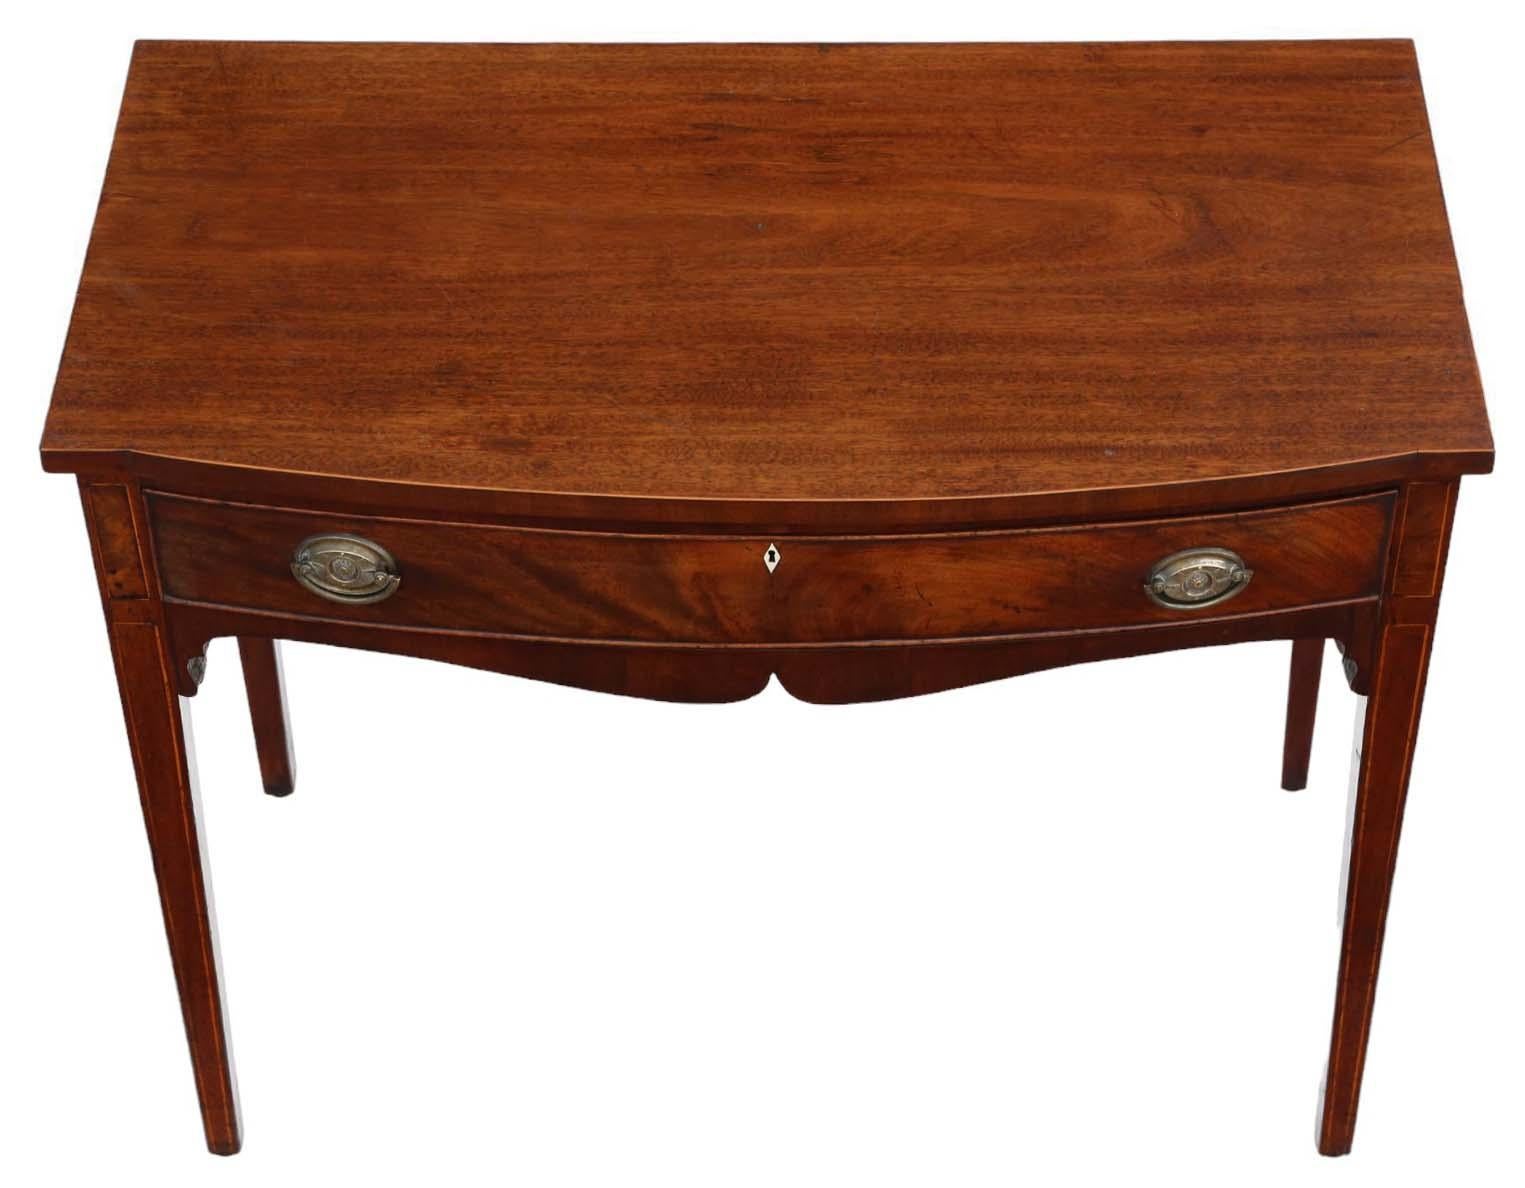 Antique 19th Century Bow Front Inlaid Mahogany Desk, serving as both a writing surface and dressing table, featuring a lovely classical late Georgian design.

This fine-quality piece exhibits no loose joints and is brimming with character and charm,